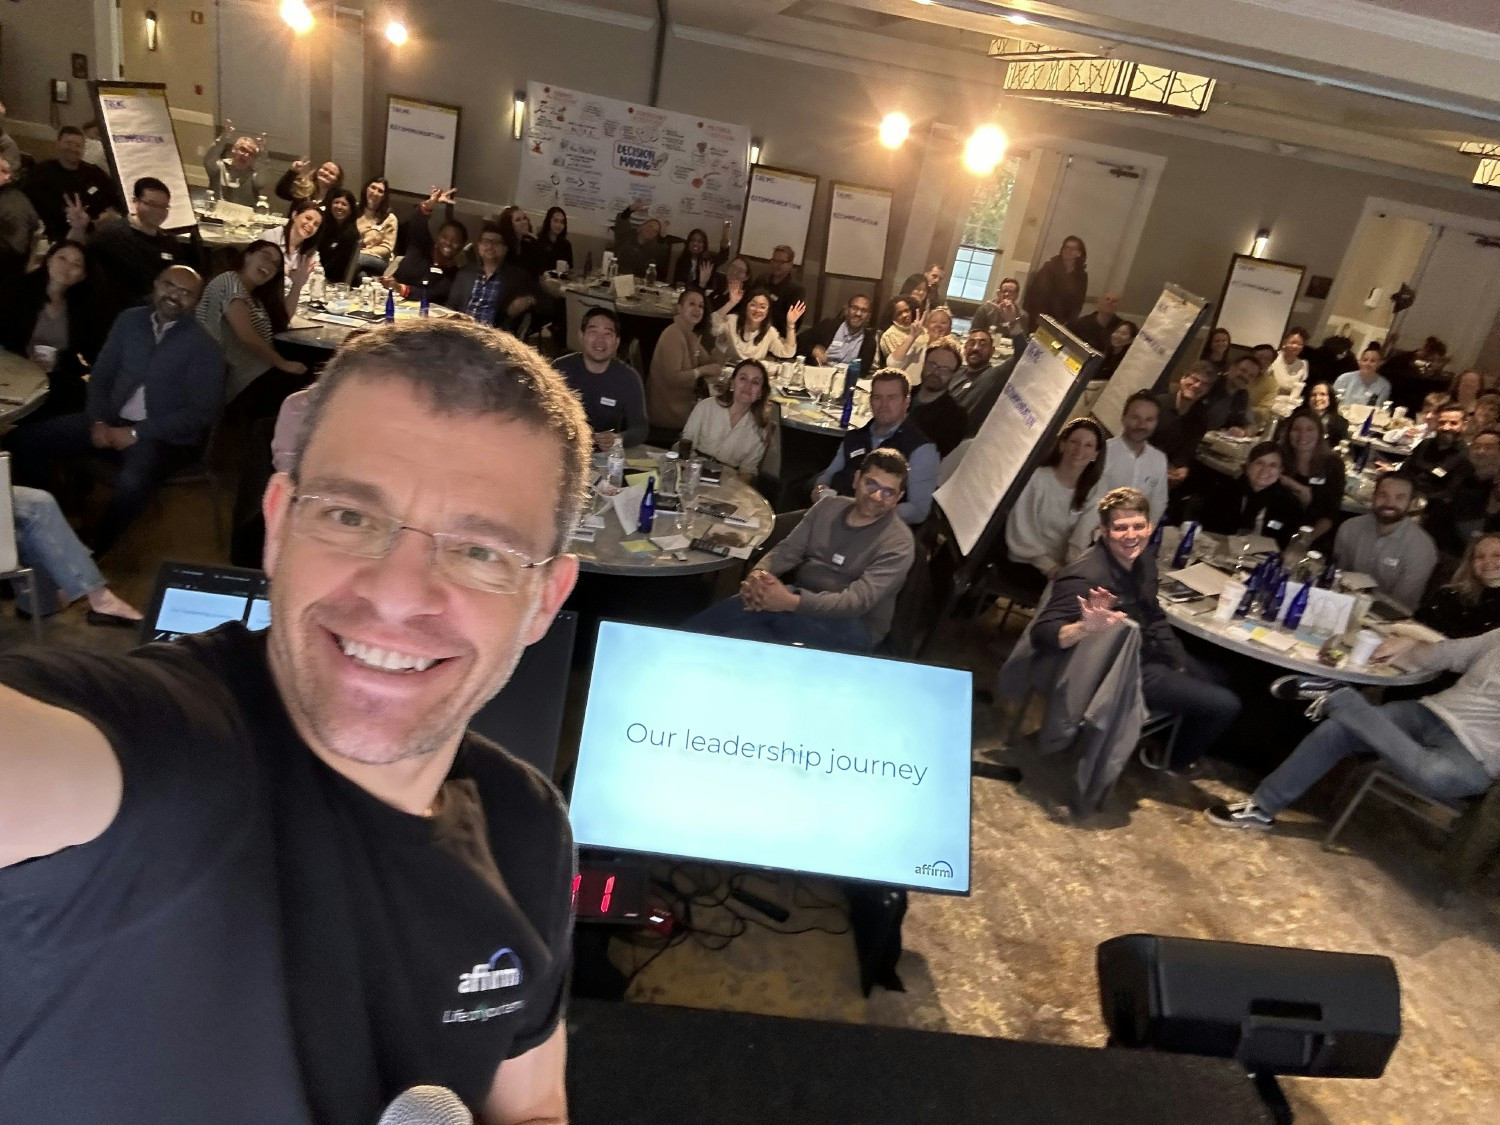 CEO, Max Levchin, takes a selfie with employees at our inaugural Senior Leader Summit.